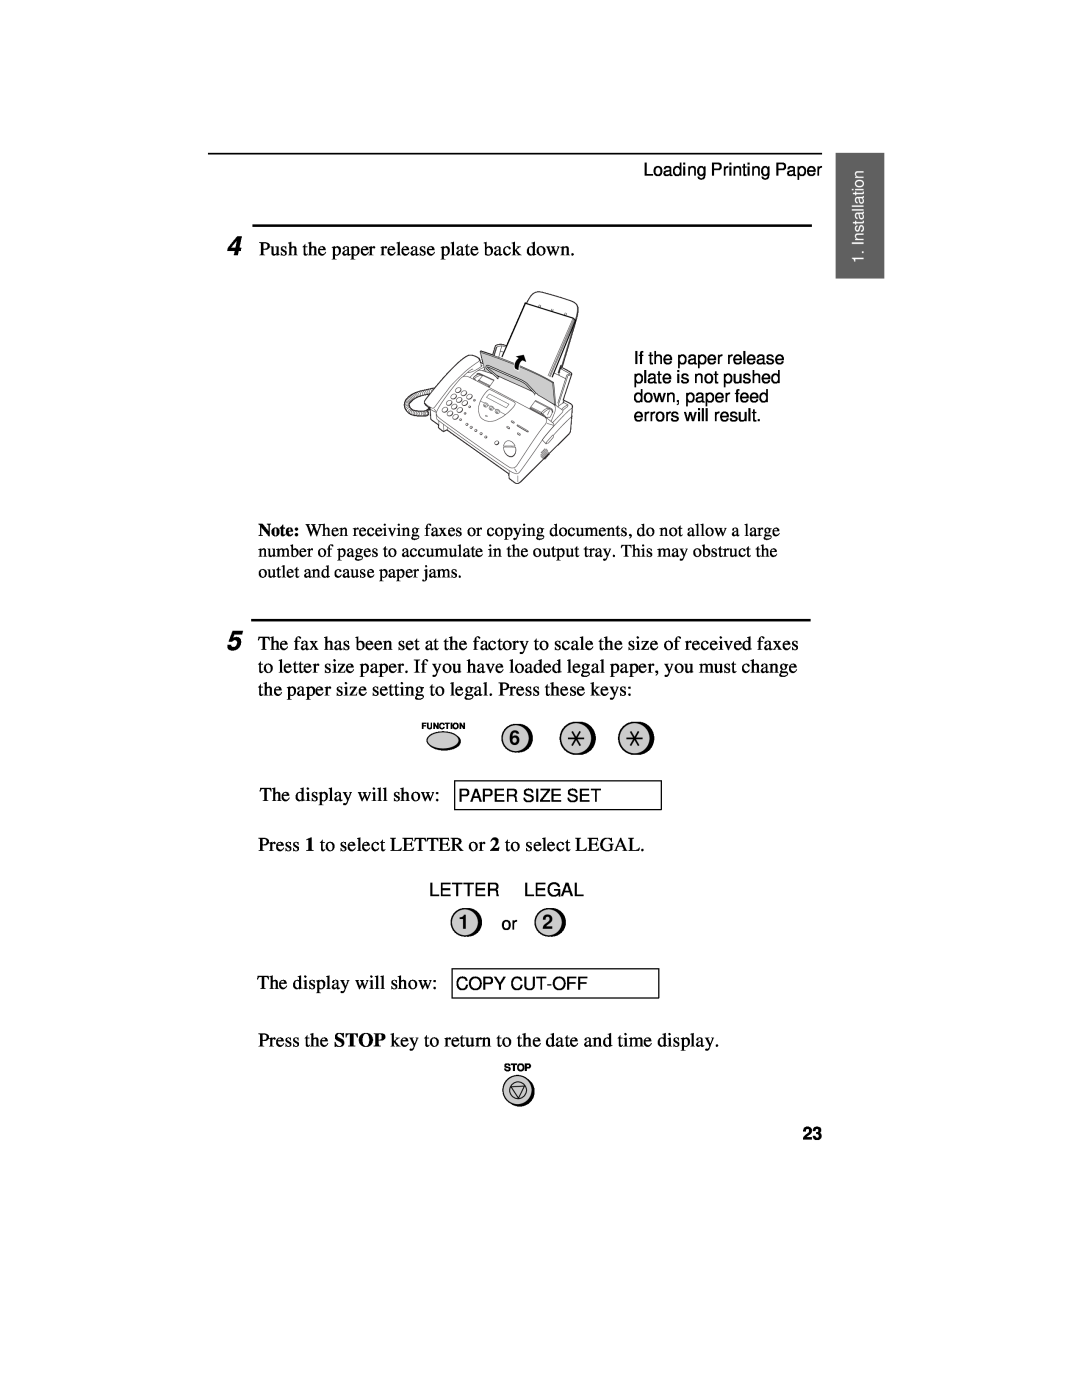 Sharp UX-460 operation manual 1 or, Letter Legal 